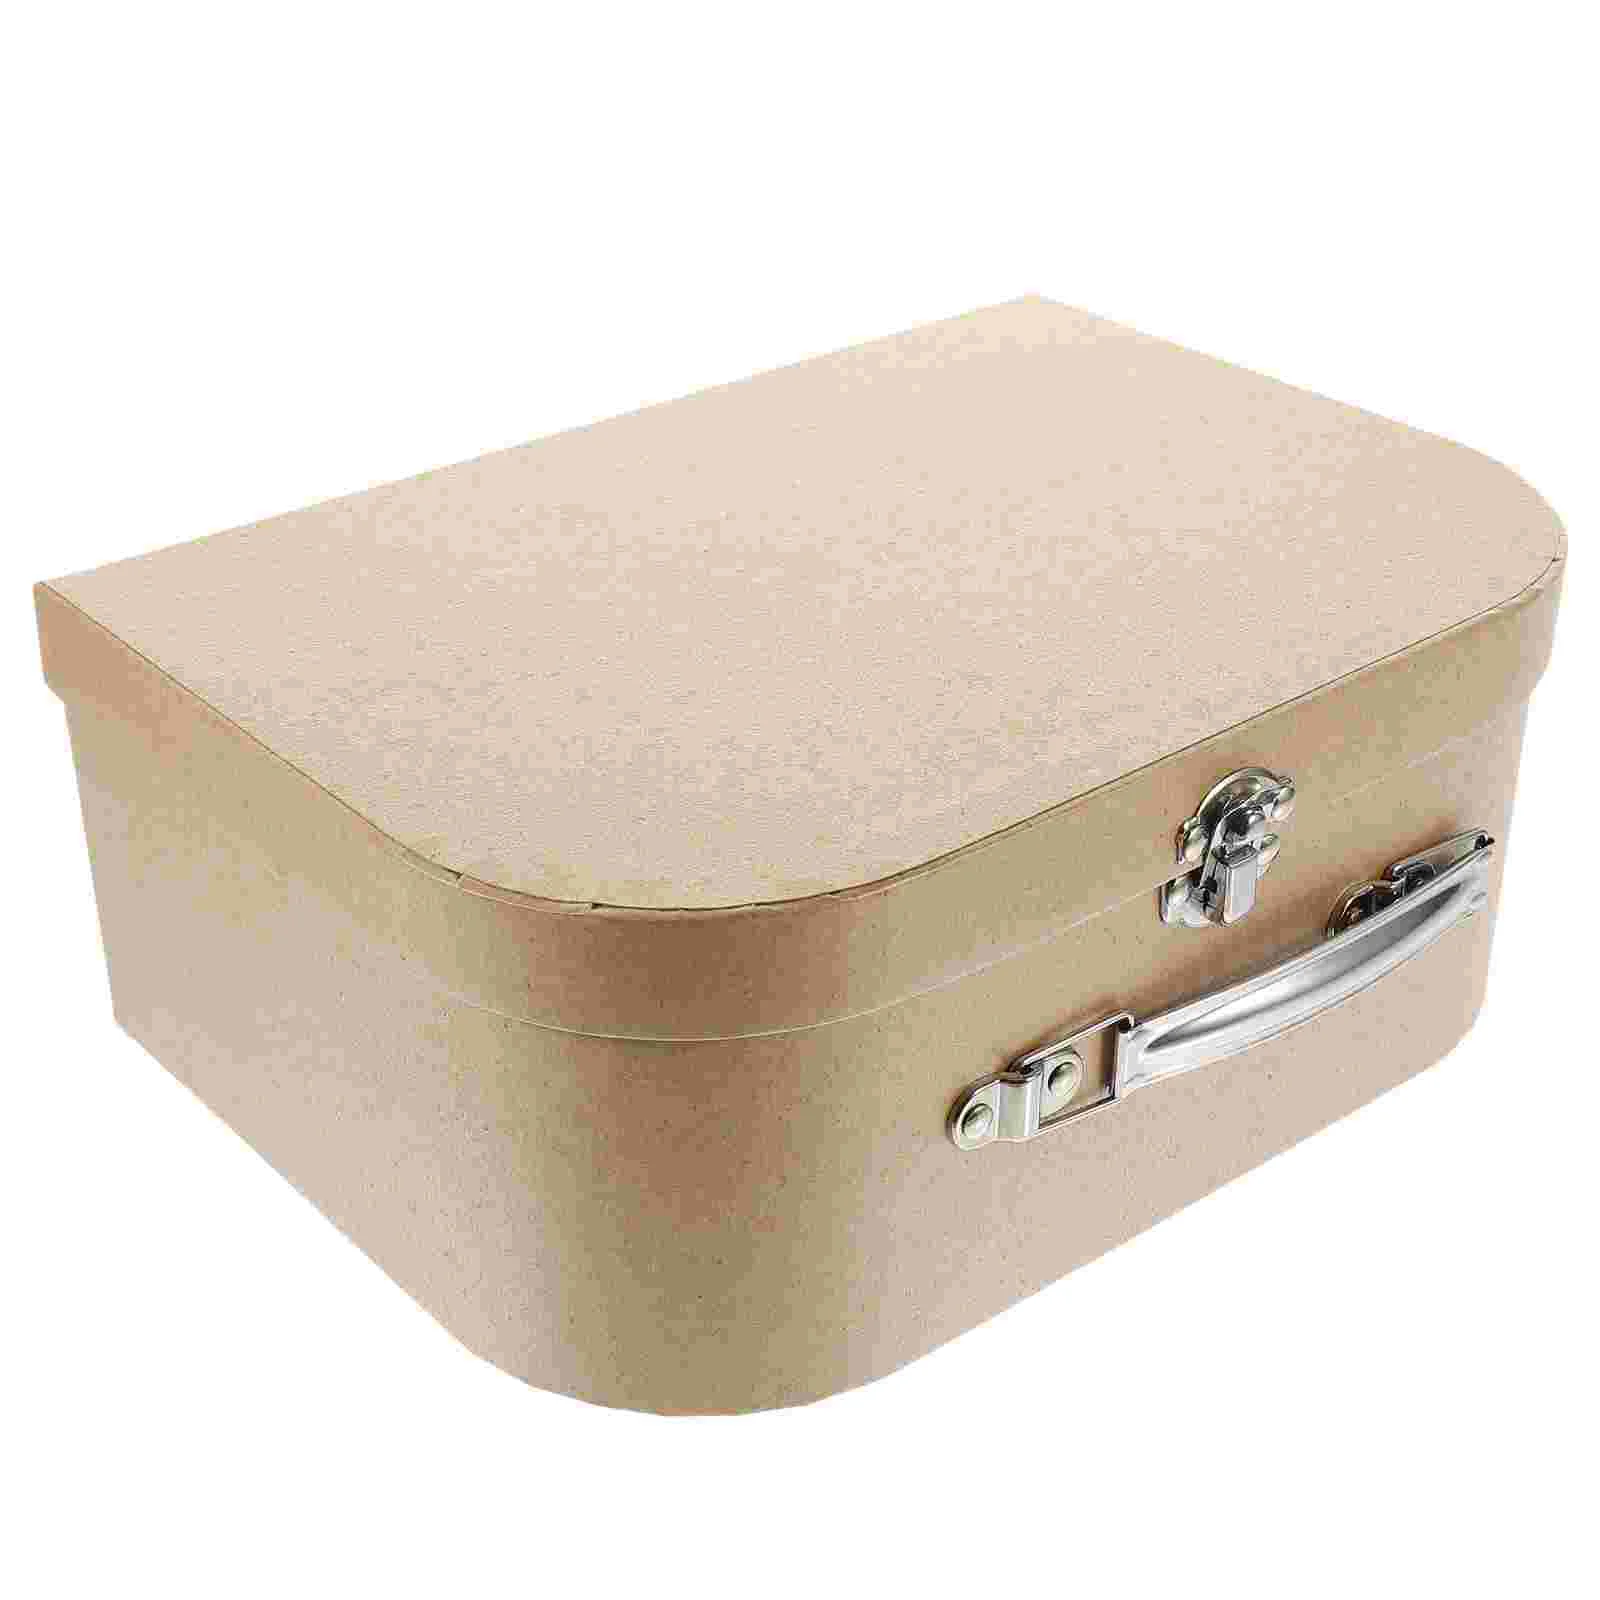 

Paperboard Suitcases Paper Storage Box Decorative Gift Boxes With Lids Travel Themed Chest Small Stackable Luggage Mache Box